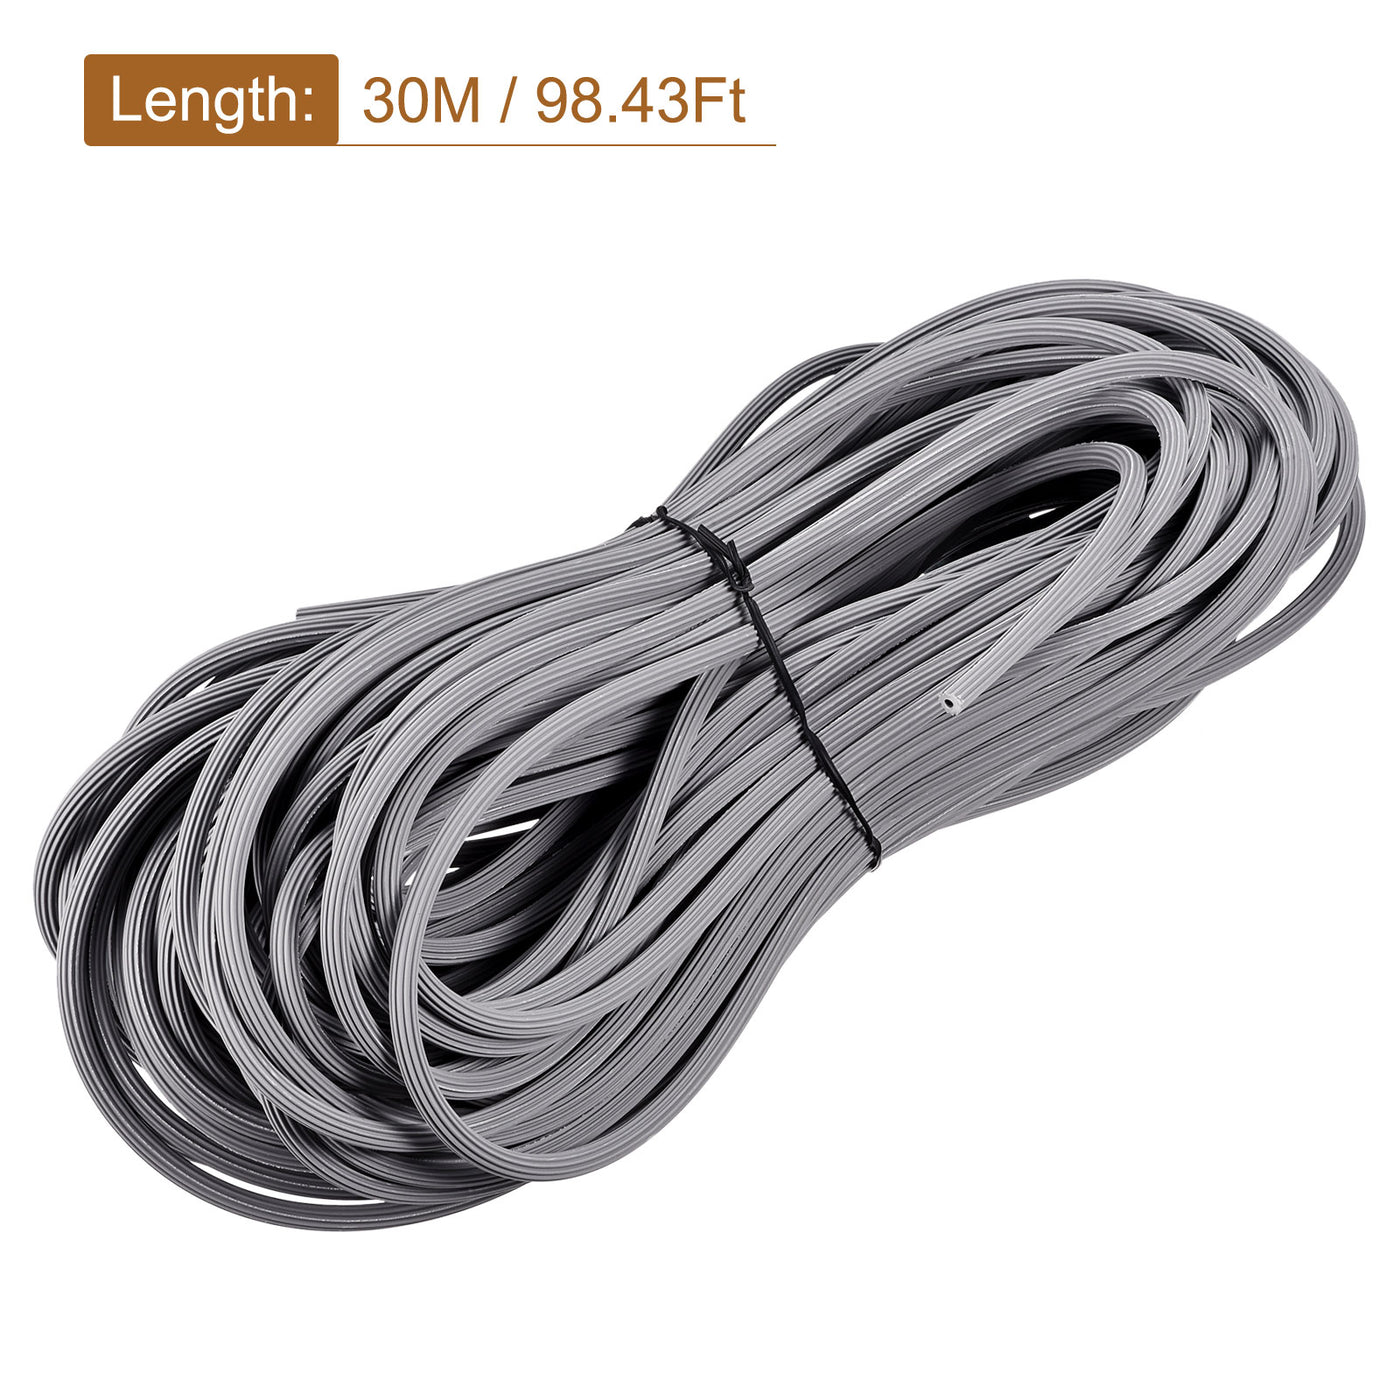 uxcell Uxcell Screen Spline 30M/98.43Ft Length PVC Sealing Strip Retainer, 5.5mm OD Gray